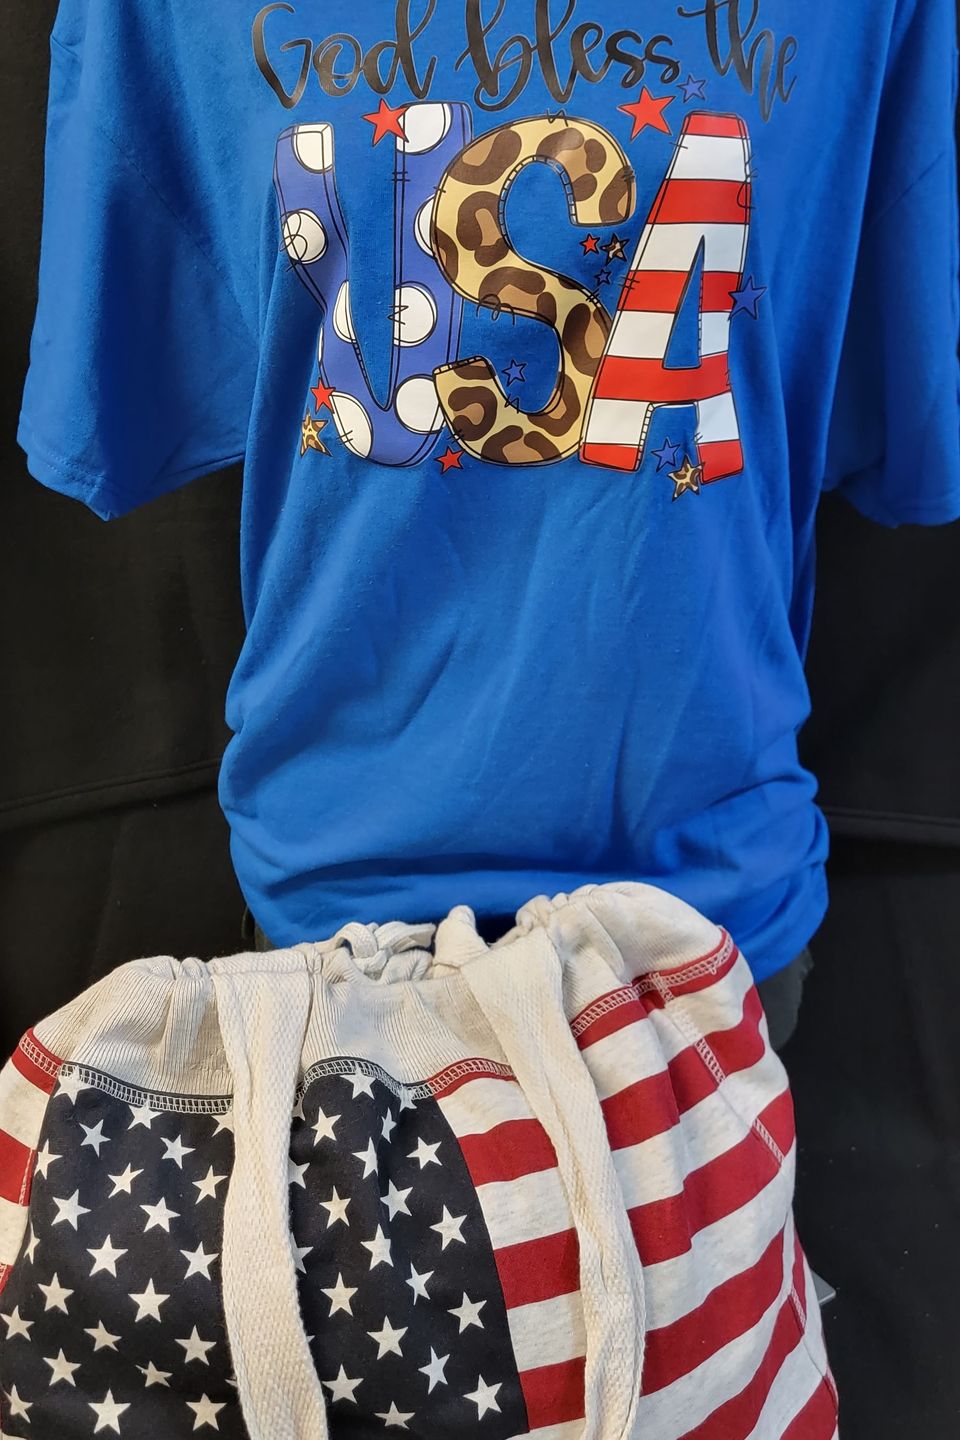 "DTF Direct-to-Film" example - "God Bless the USA" on blue t-shirt